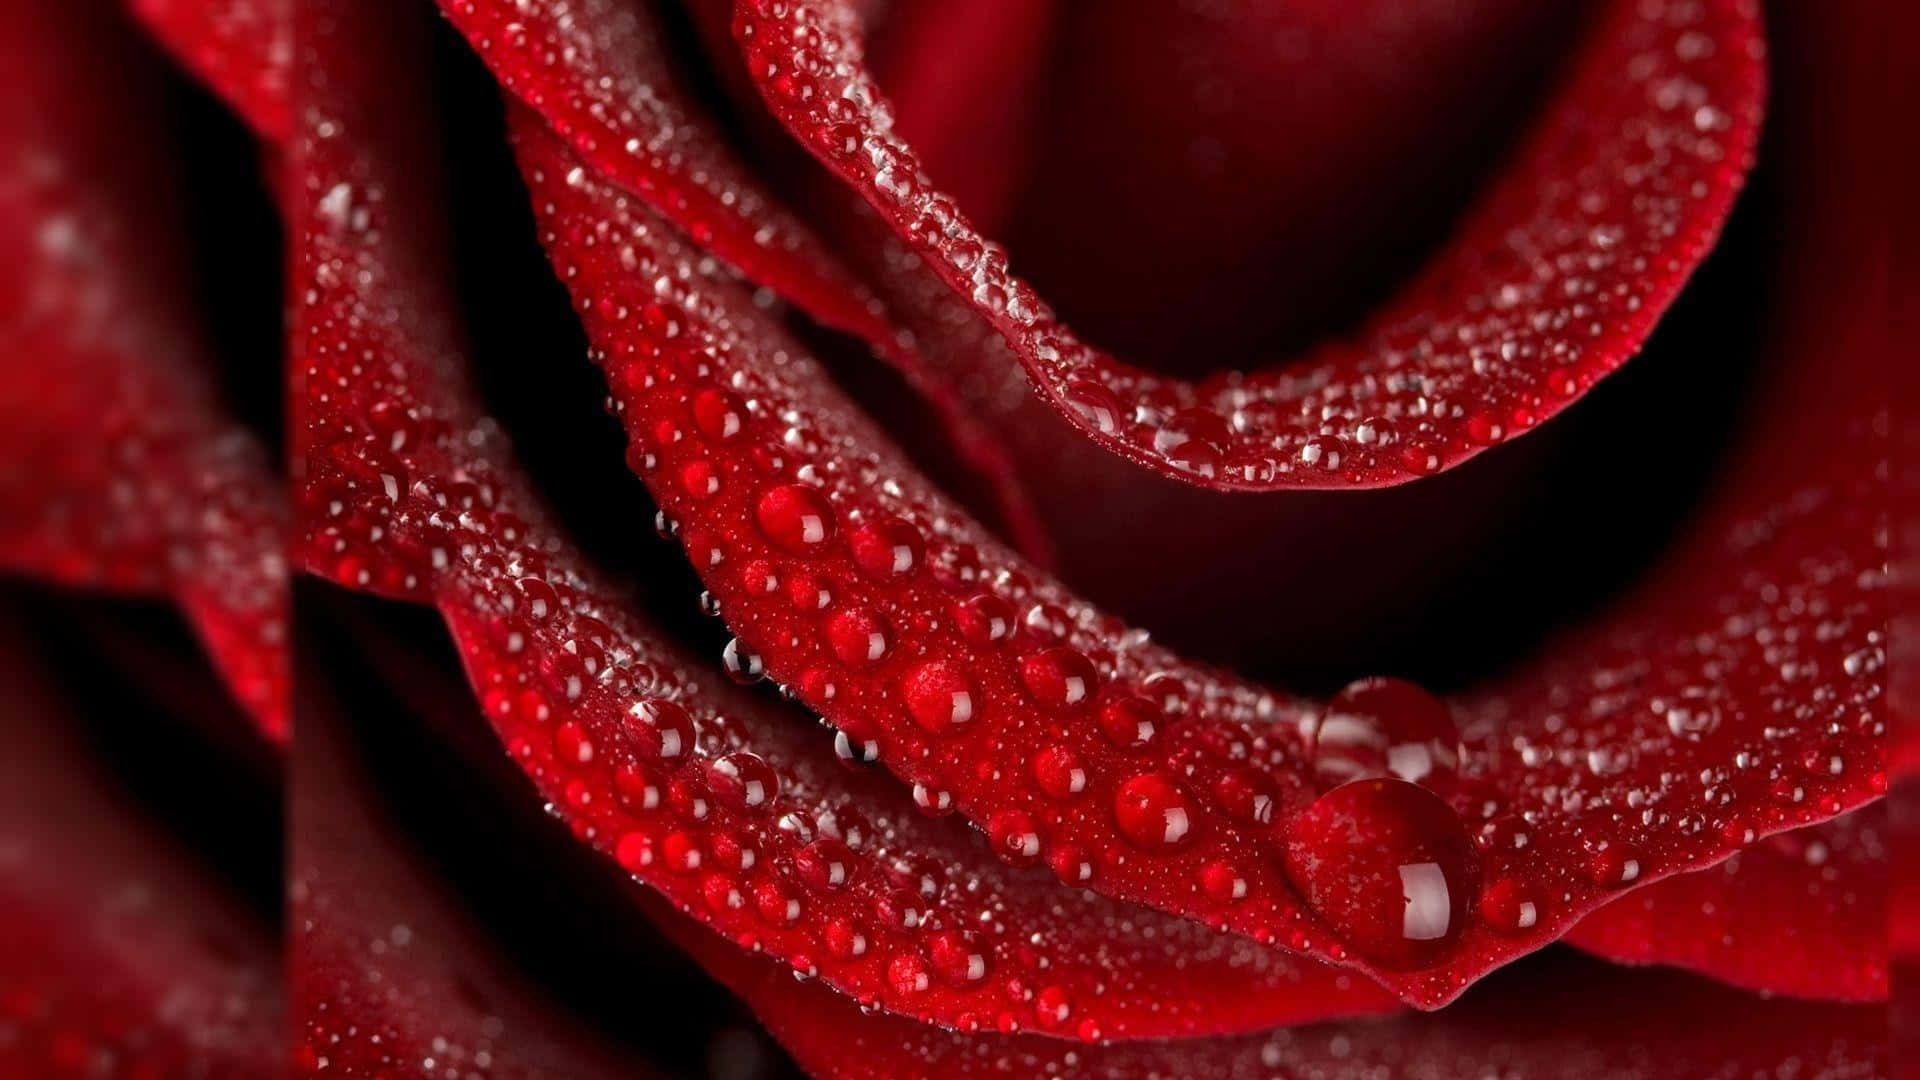 1080p Red Rose Petals With Mist Background